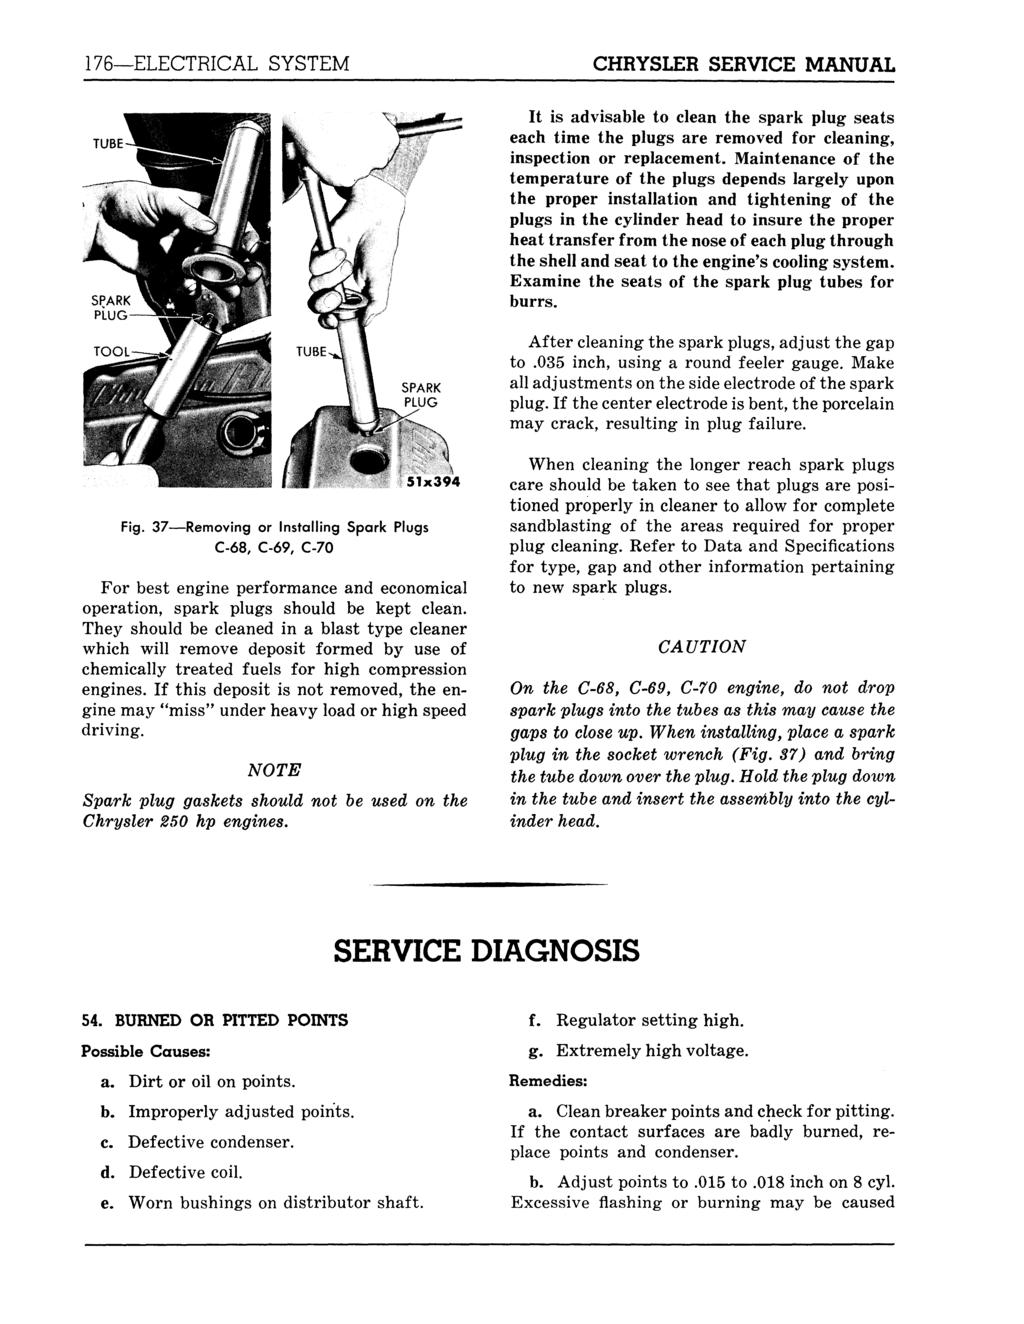 176 ELECTRICAL SYSTEM CHRYSLER SERVICE MANUAL TUBE It is advisable to clean the spark plug seats each time the plugs are removed for cleaning, inspection or replacement.